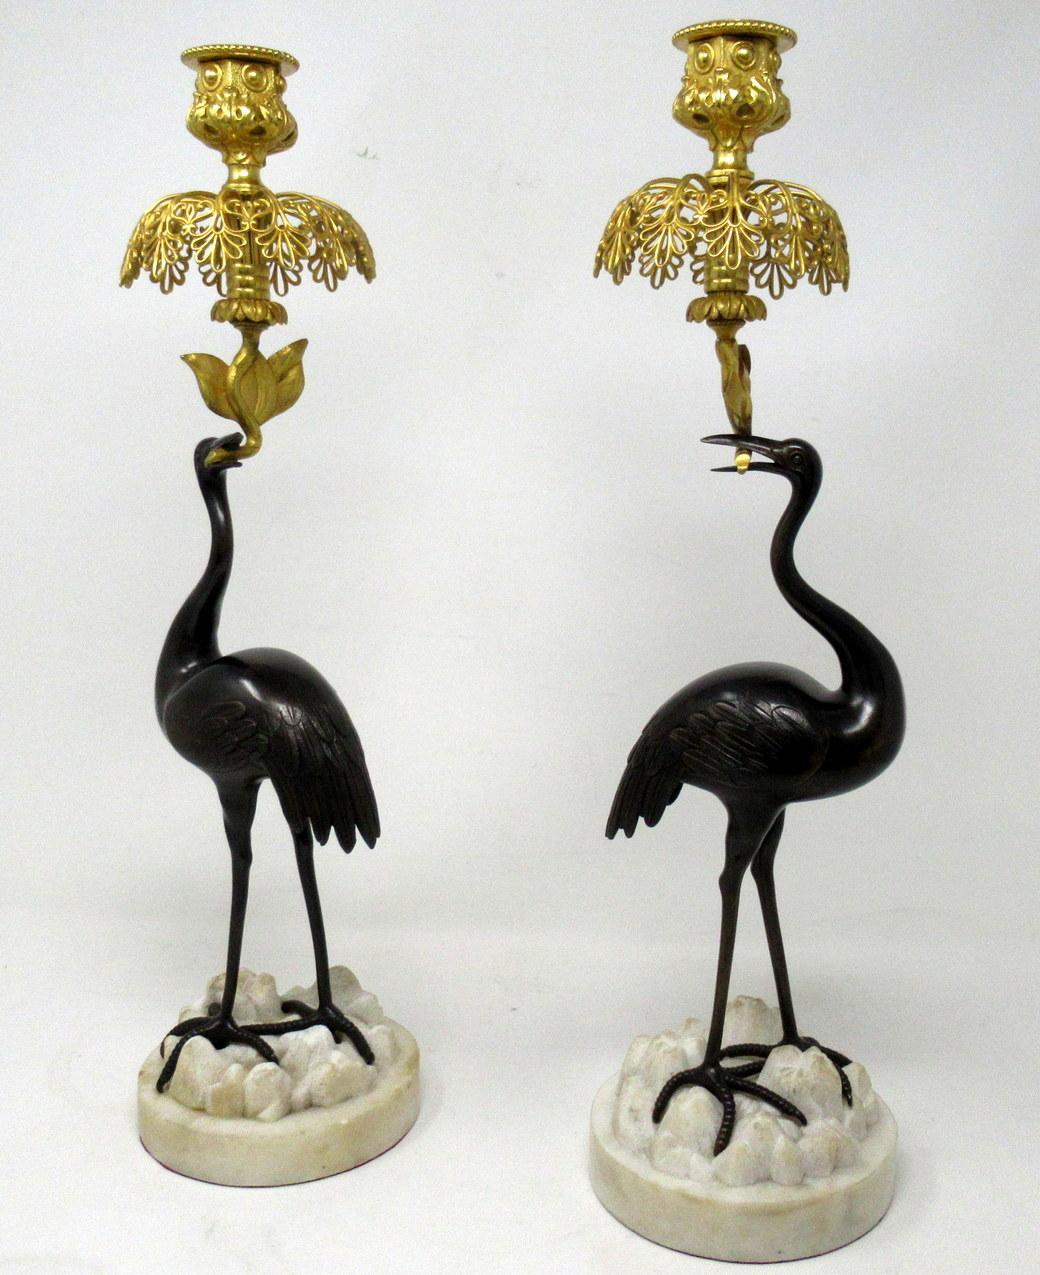 Stunning Pair of English Ormolu and Patinated Bronze Single Light Candlesticks of good size proportions modelled as a Pair of tall standing Storks, firmly attributed to ABBOTT. Circa 1840-60. 

Each exquisitely modelled as standing Storks or Cranes